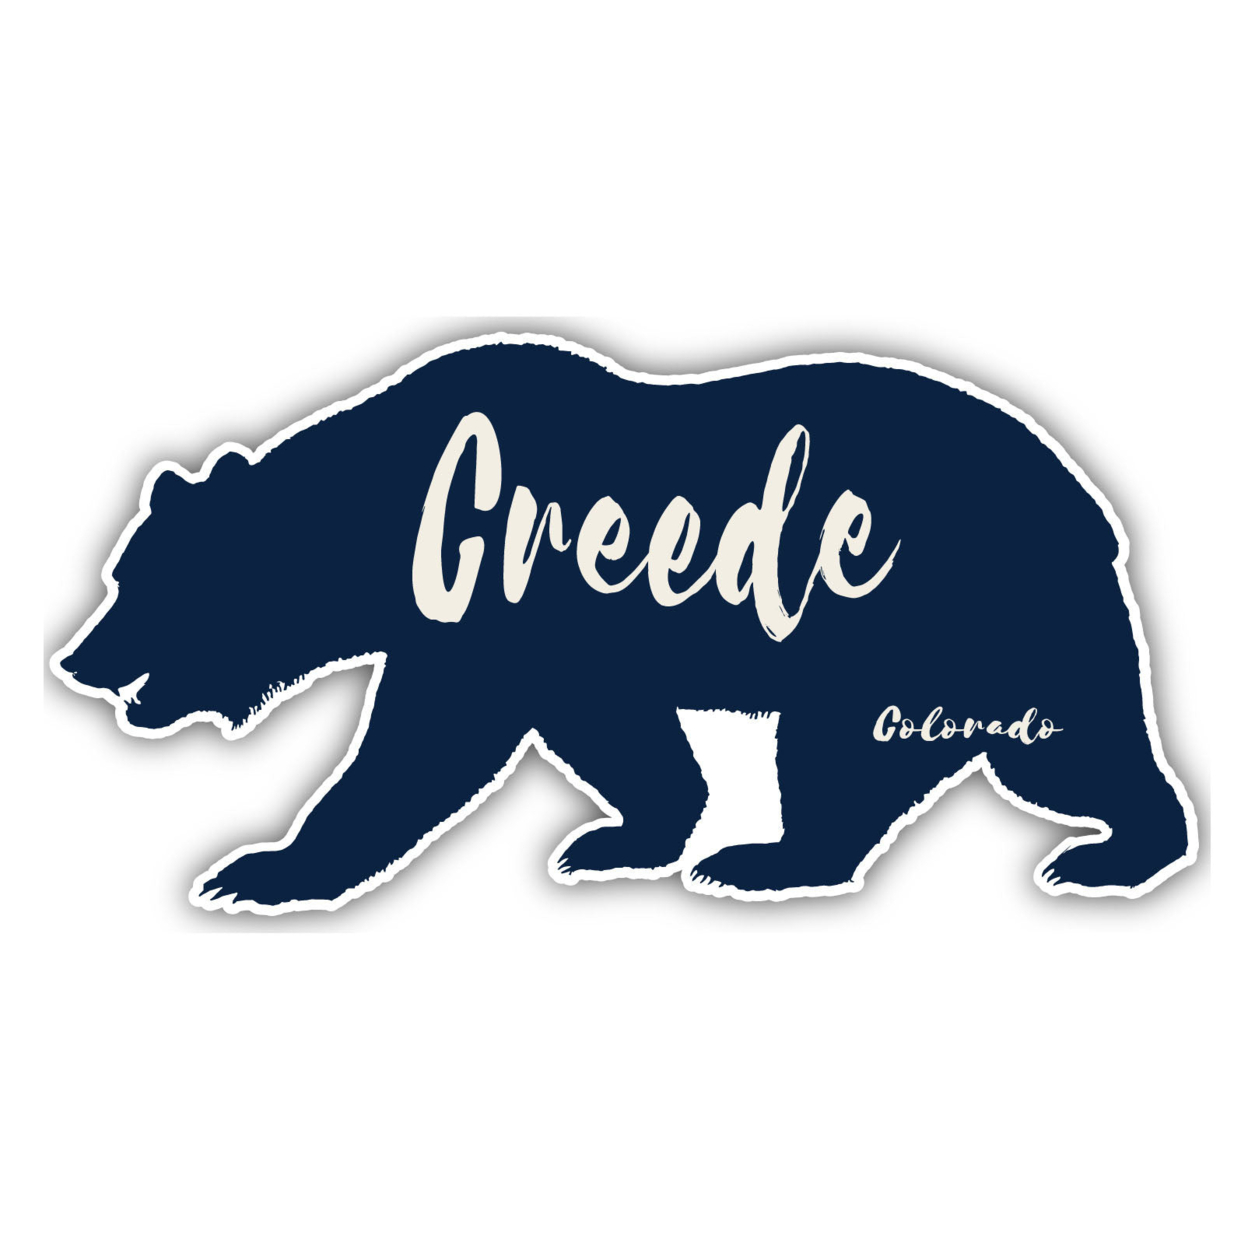 Creede Colorado Souvenir Decorative Stickers (Choose Theme And Size) - 4-Pack, 4-Inch, Bear